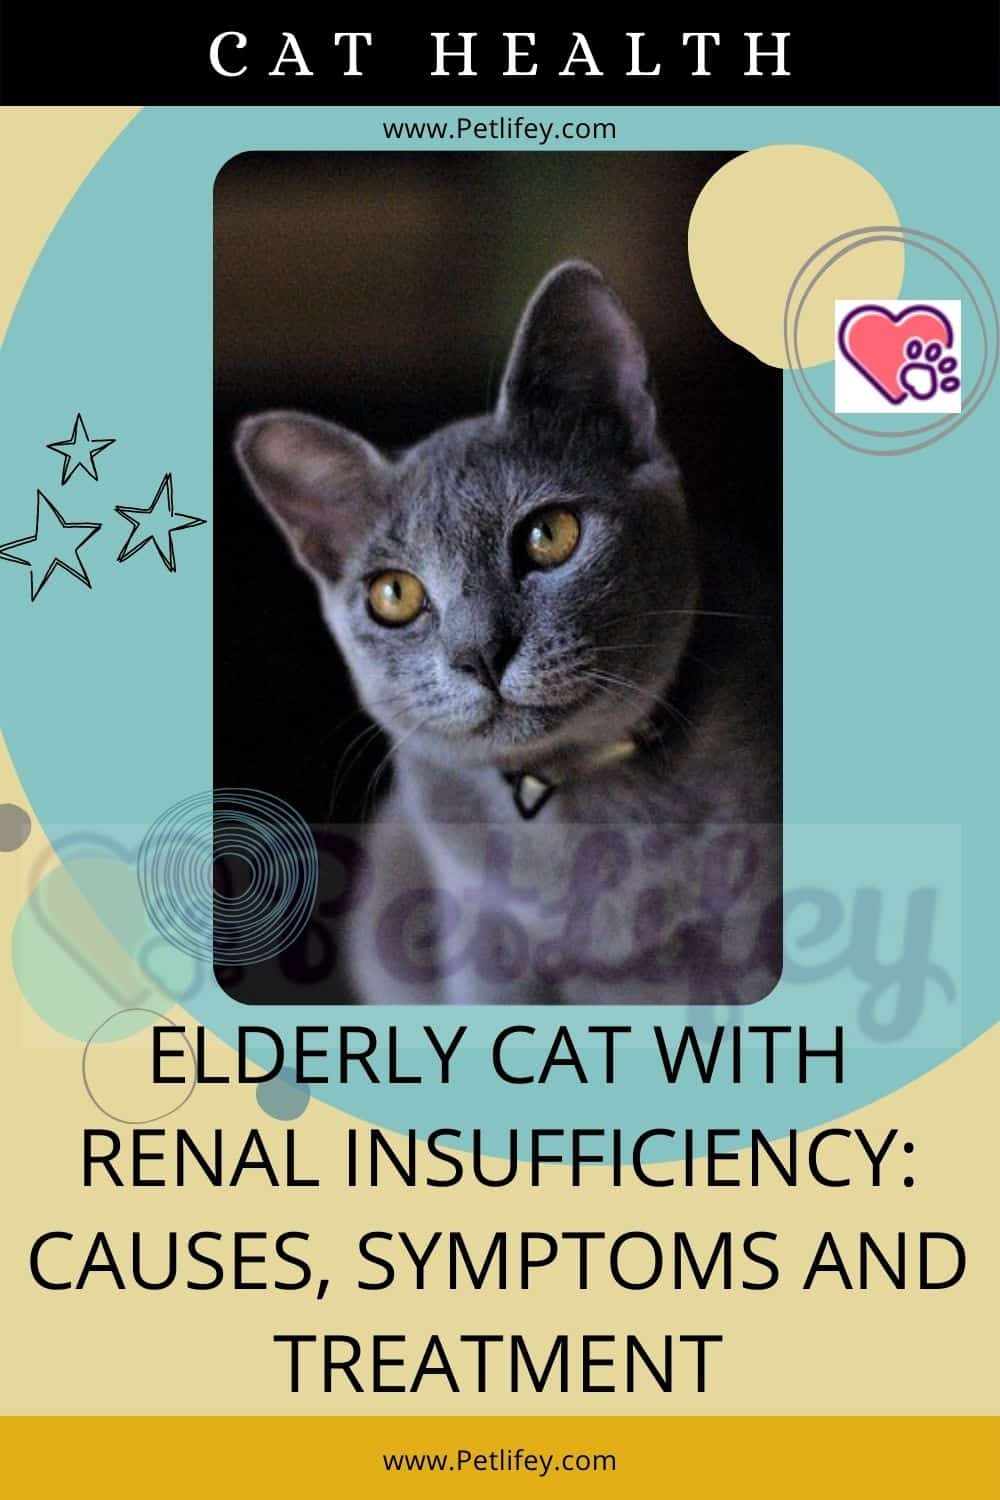 Elderly cat with renal insufficiency: